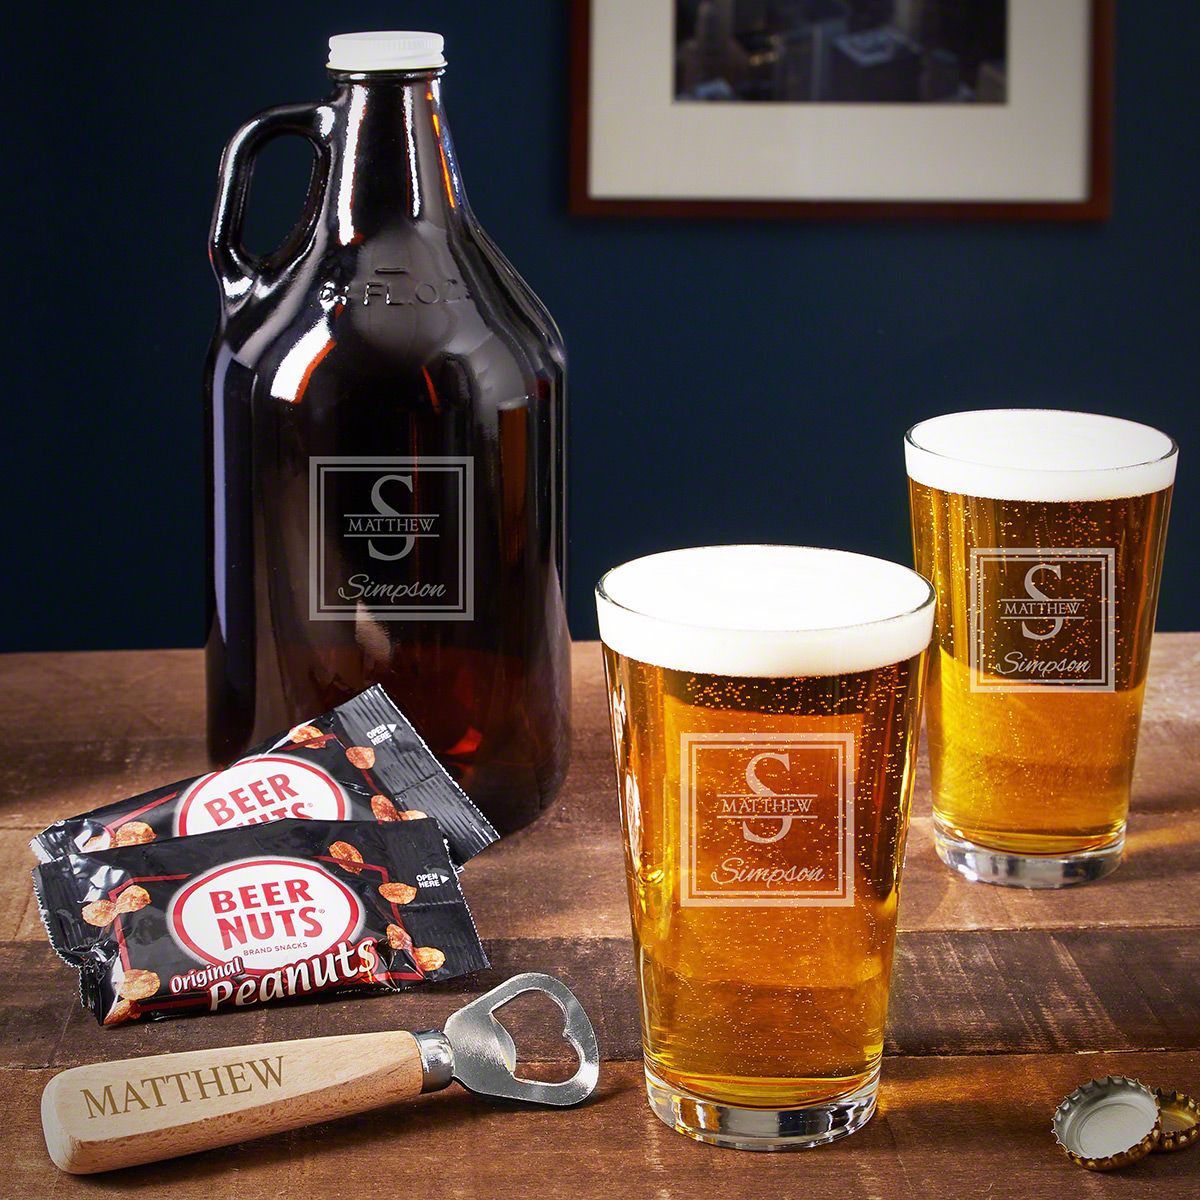 Oakhill Personalized Pint and Growler Set of Beer Gift Sets for your step-son